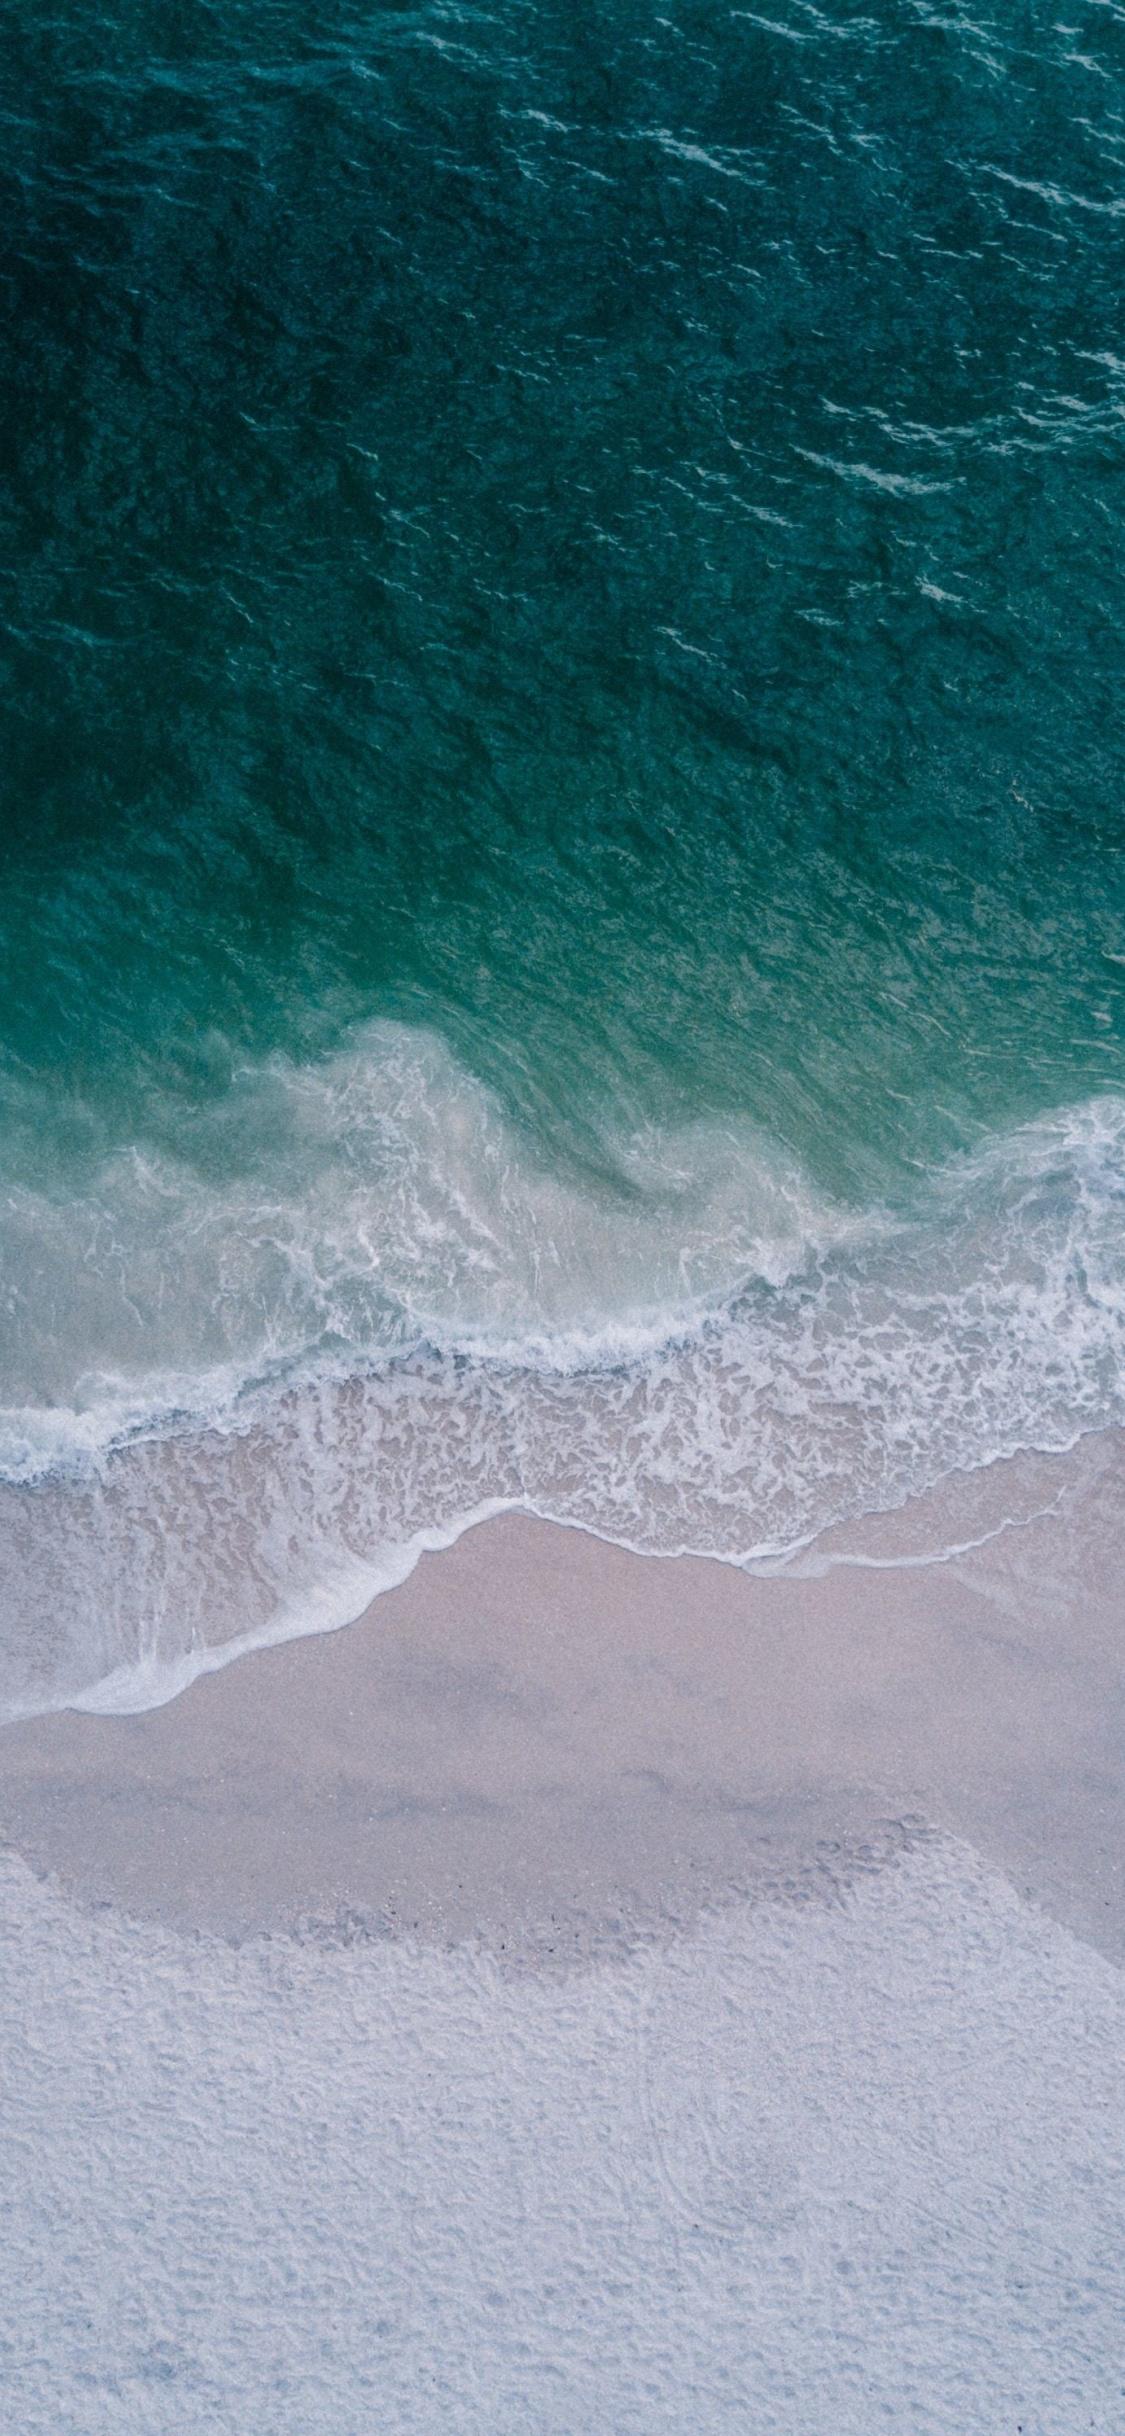 Download beach, calm sea, sea waves, aerial view 1125x2436 wallpaper, iphone x, 1125x2436 HD image, background, 7360